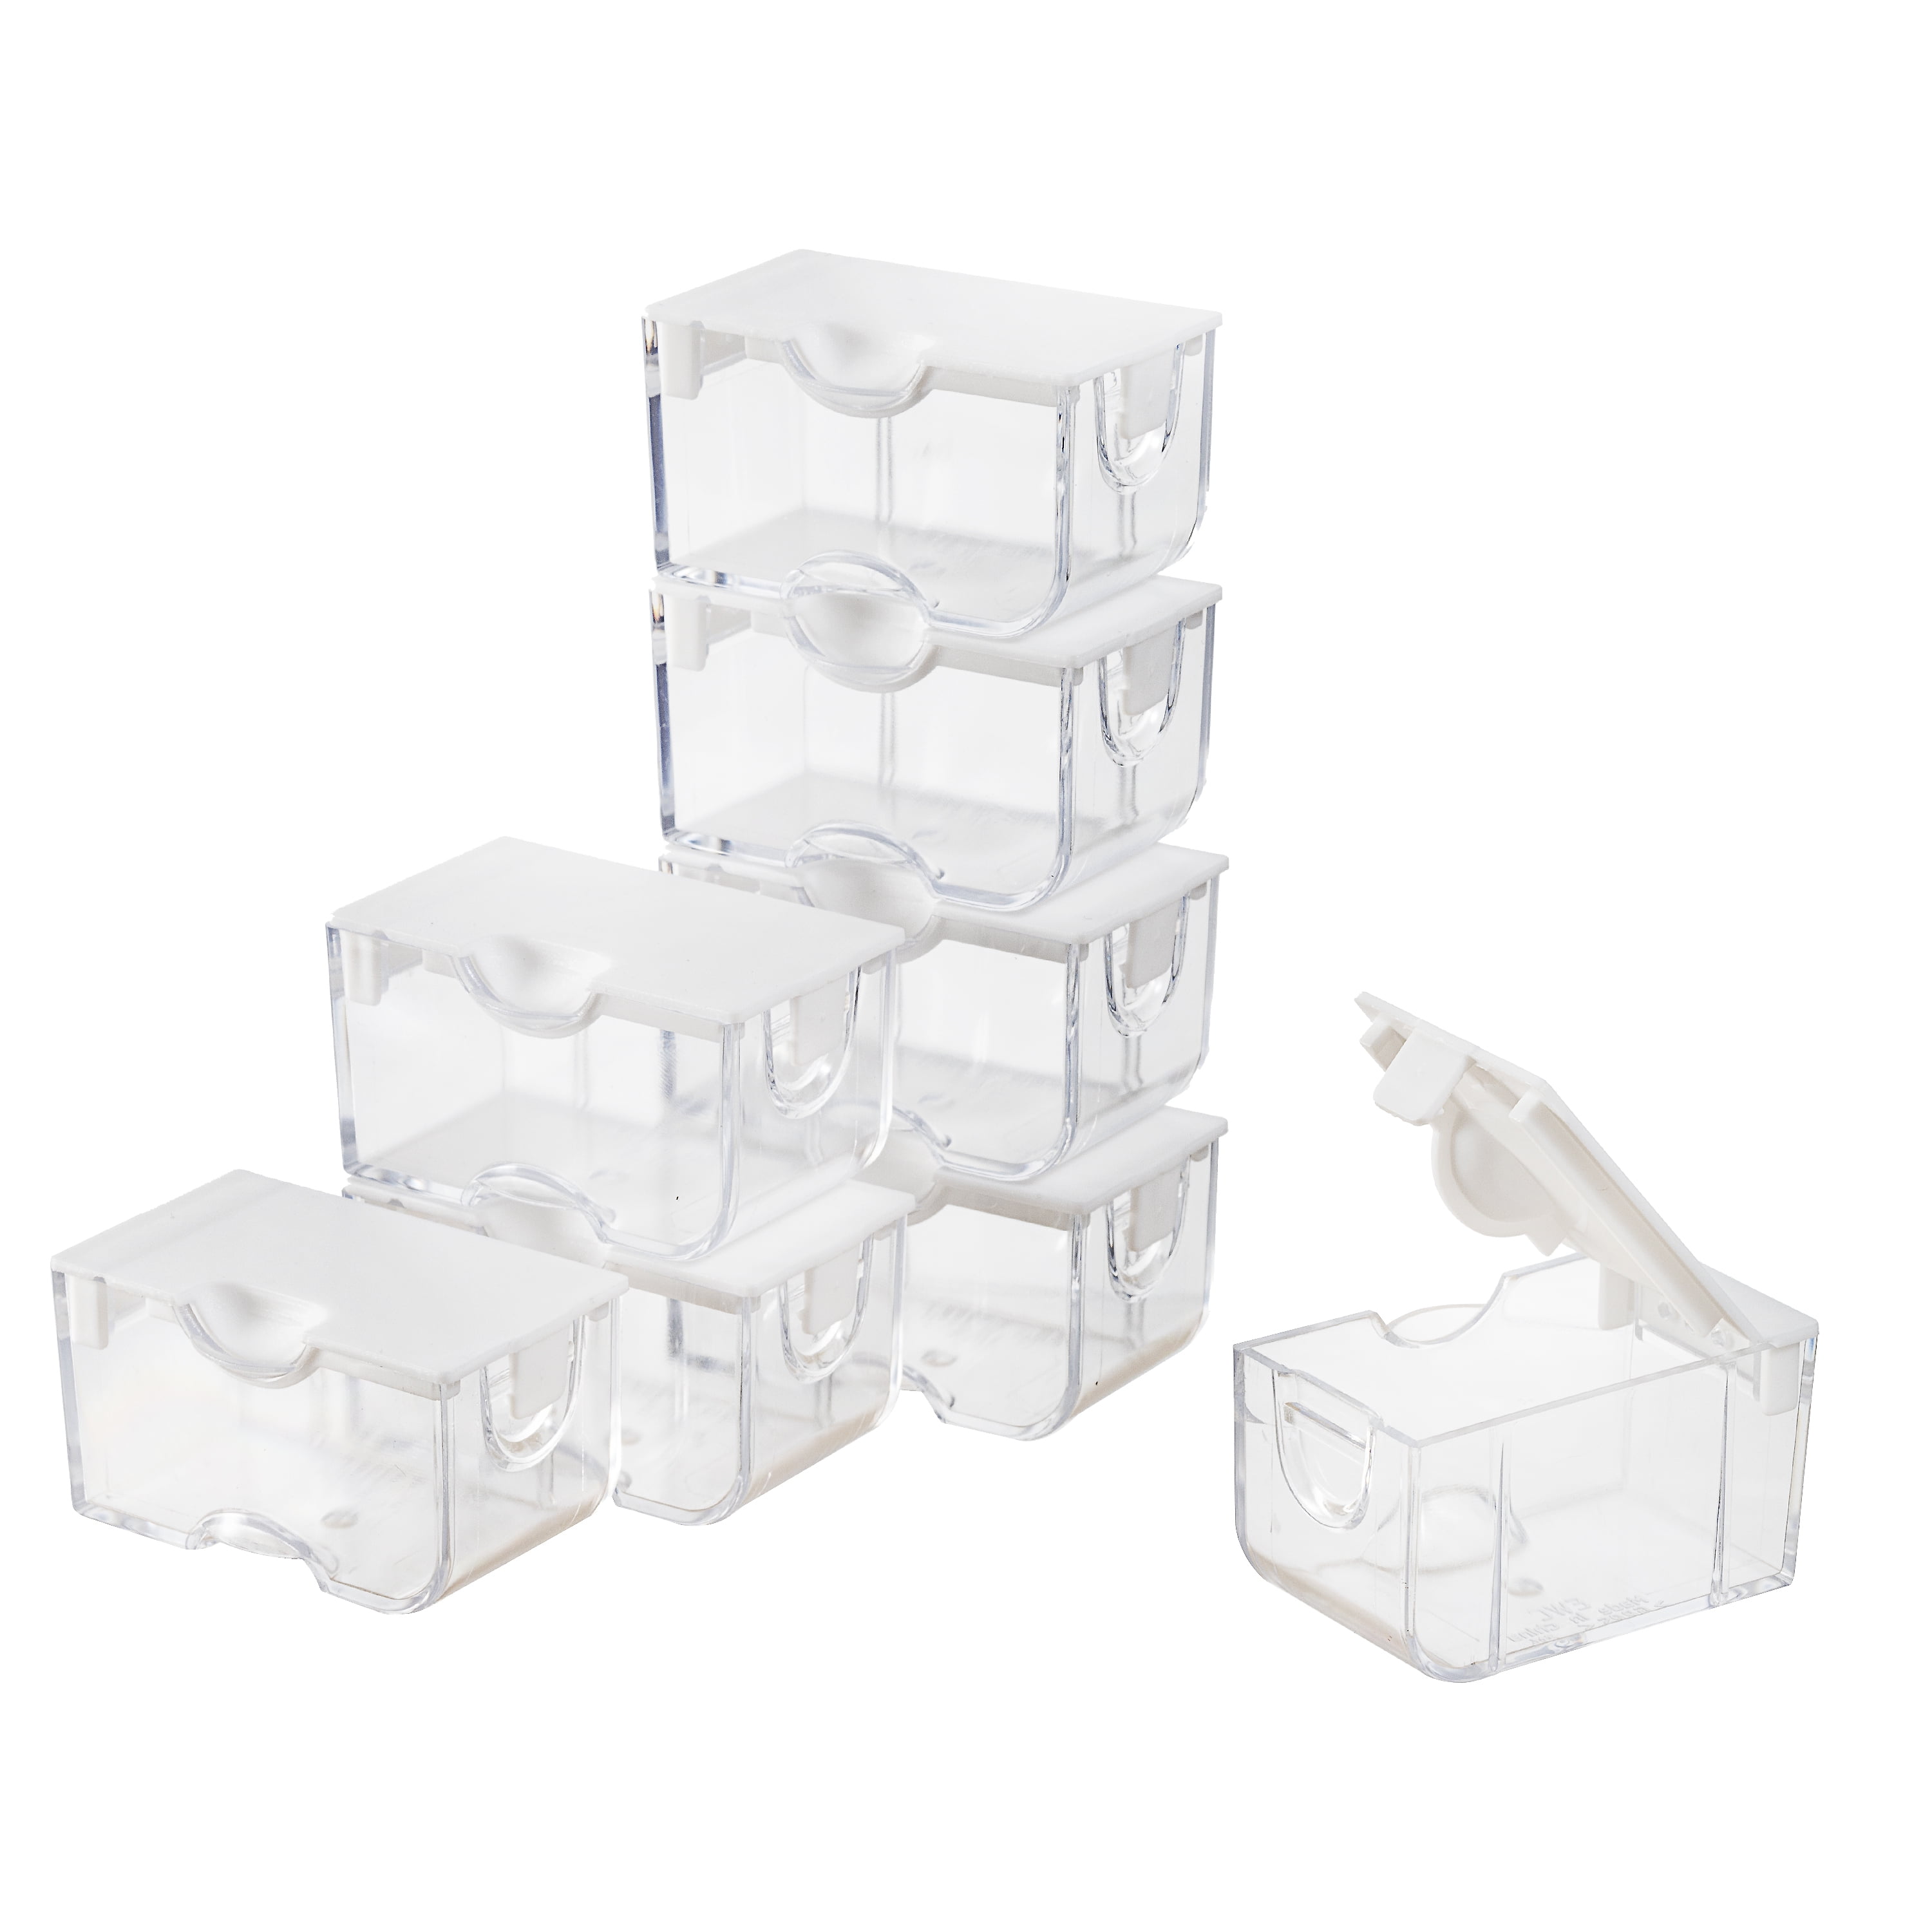  Bead Storage Solutions Elizabeth Ward 5 Piece Craft Organizing  Storage Containers for Small Beads, Crystals, and Fasteners, Clear (3 Pack)  : Arts, Crafts & Sewing